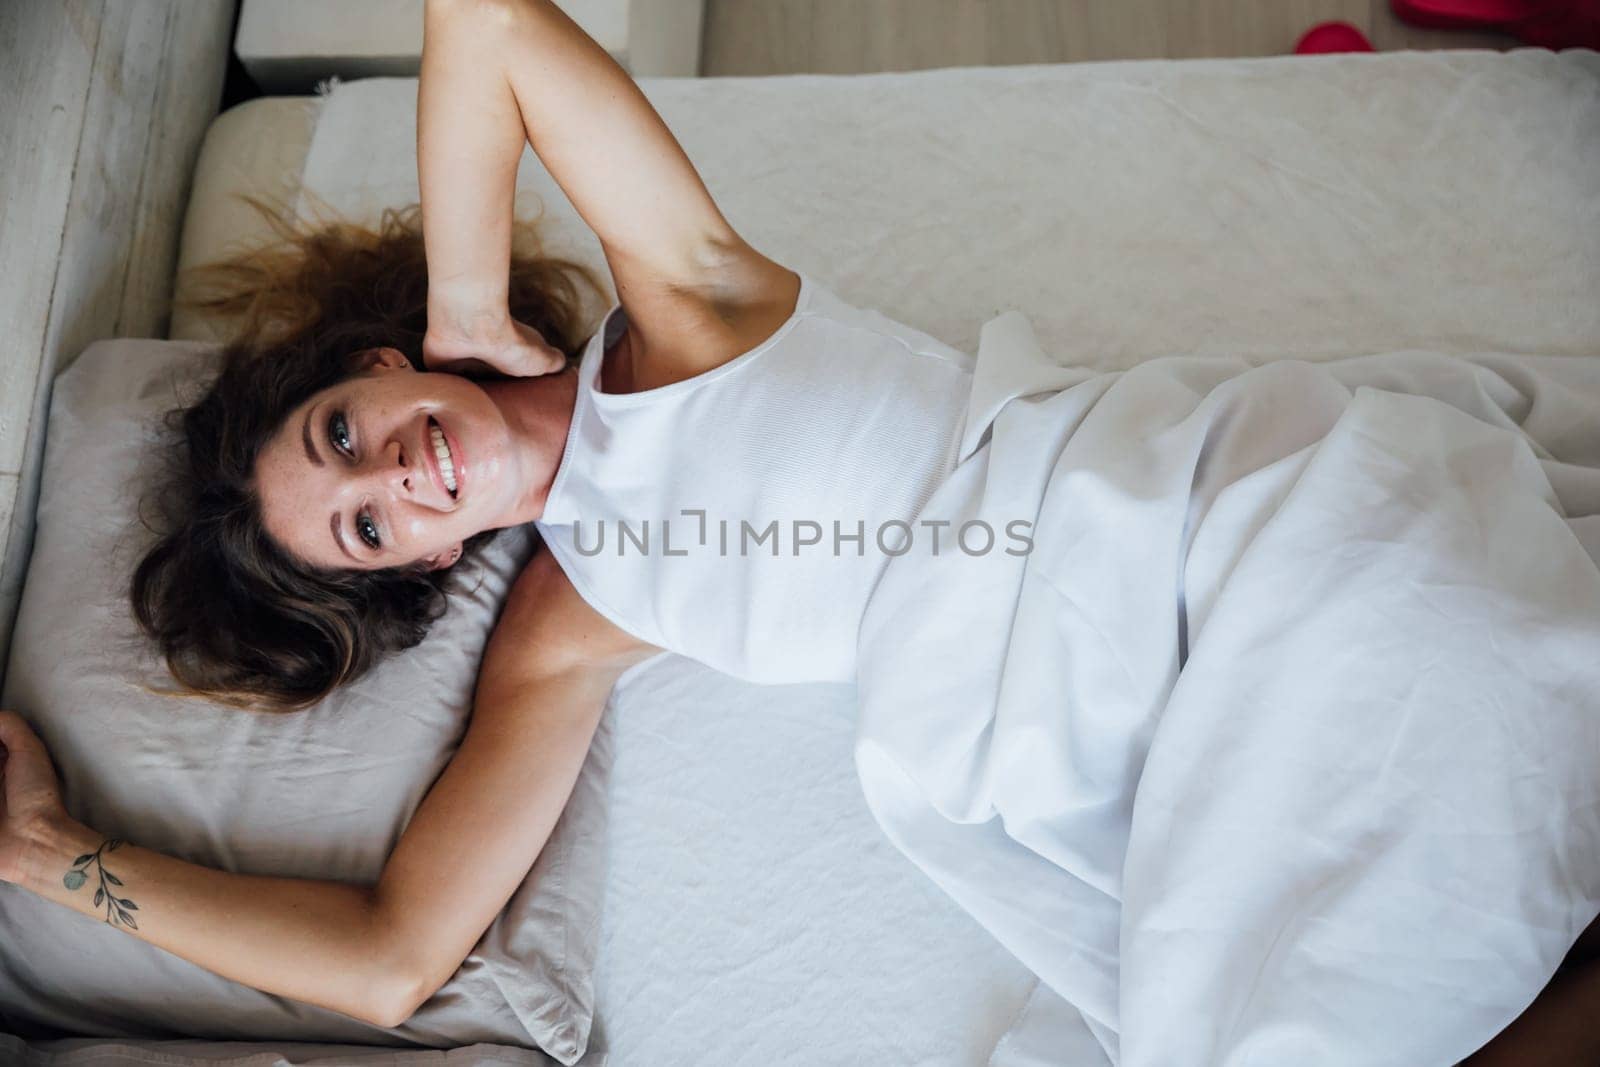 Woman sleeping. High angle view of beautiful young woman lying in bed and keeping eyes closed while covered with blanket. Stock photo